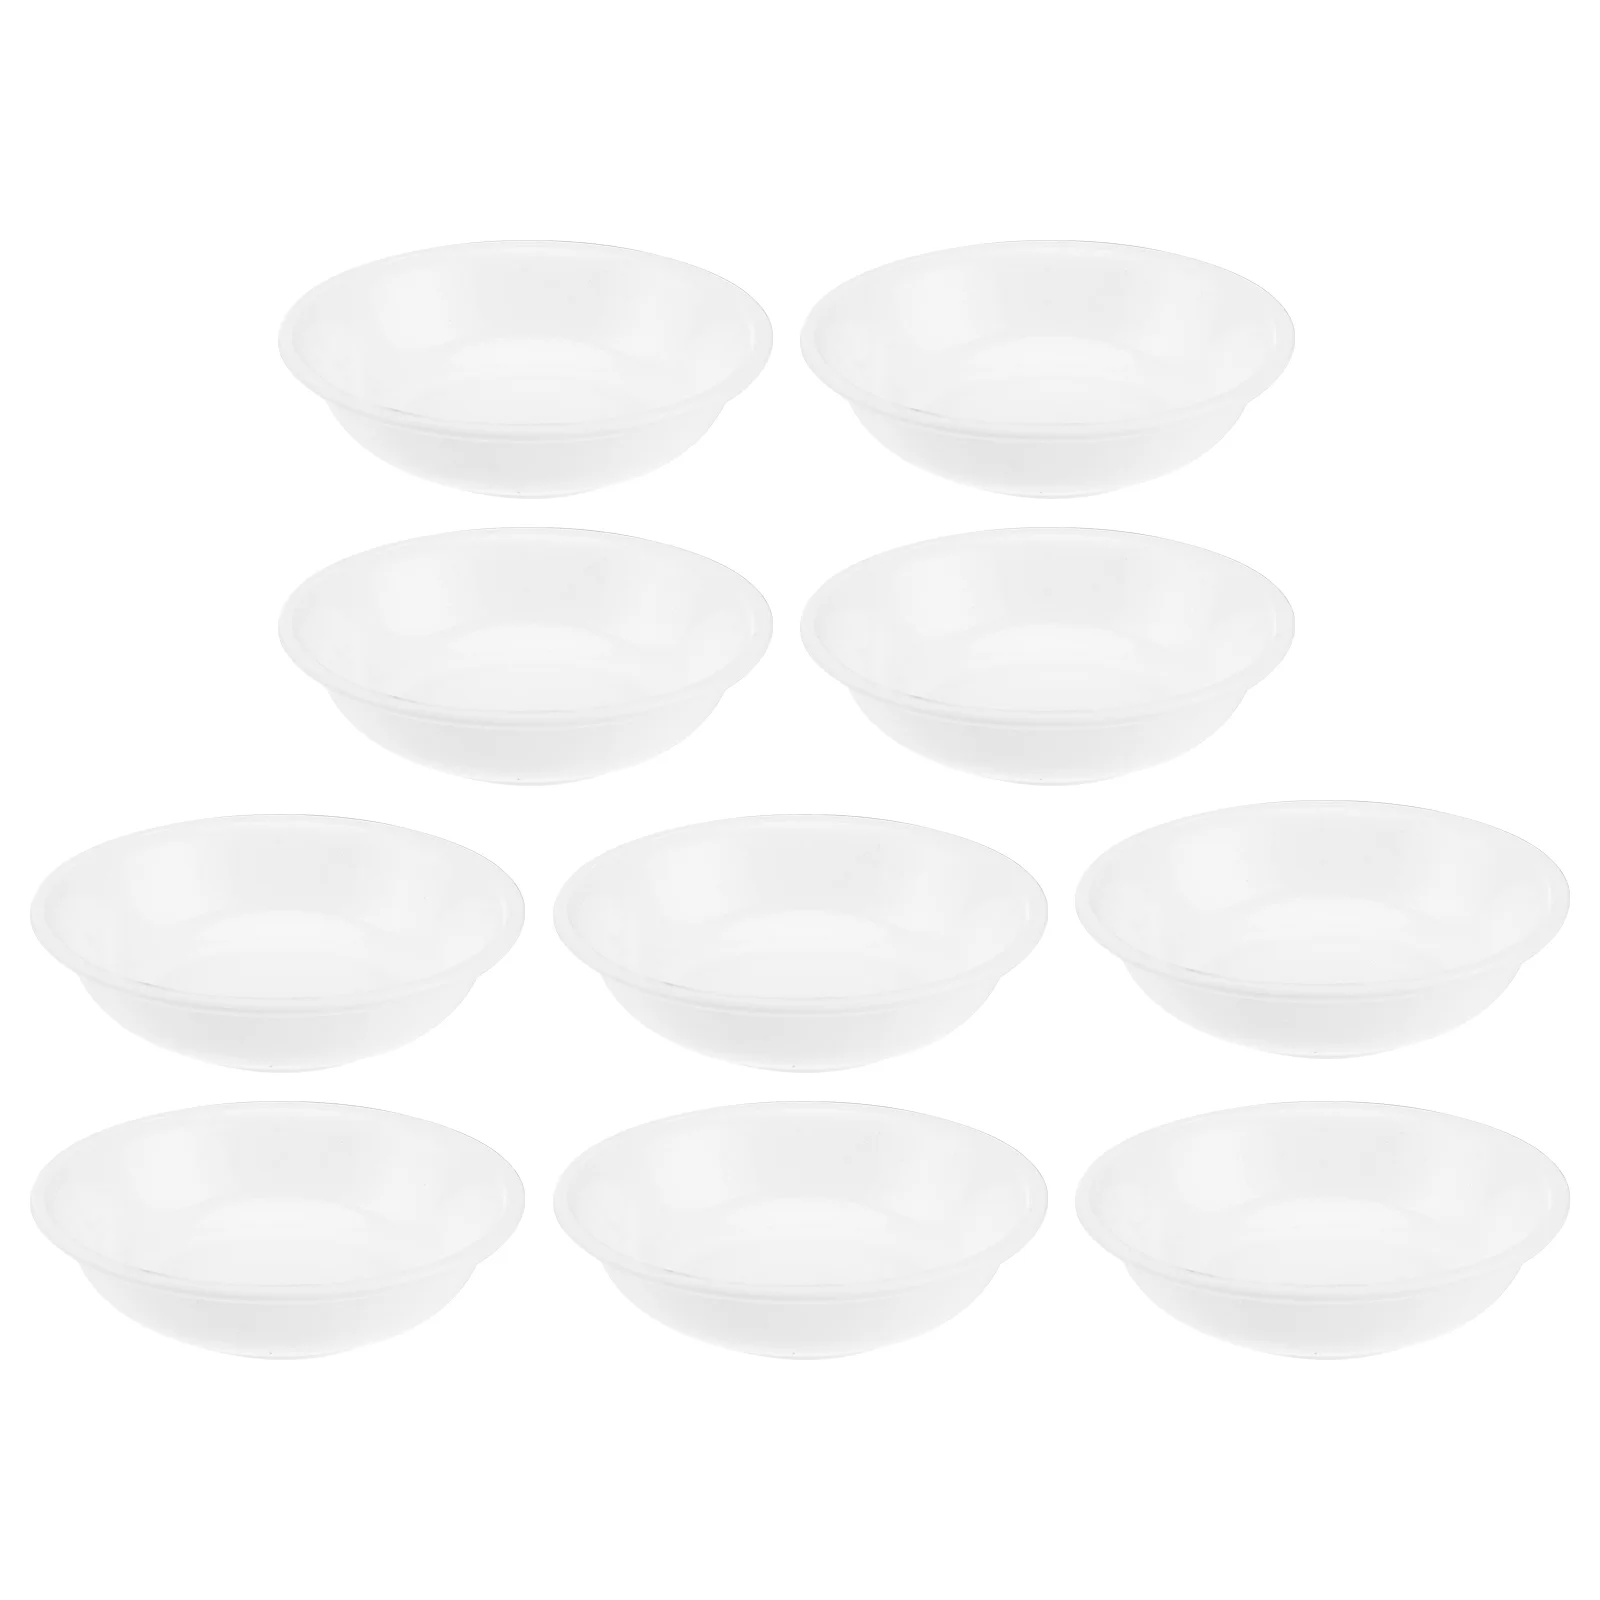 

10 Pcs Snack Tray Dip Bowls Set Sushi Soy Dipping Bowl Soy Sauce Dish Snack Serving Dishes